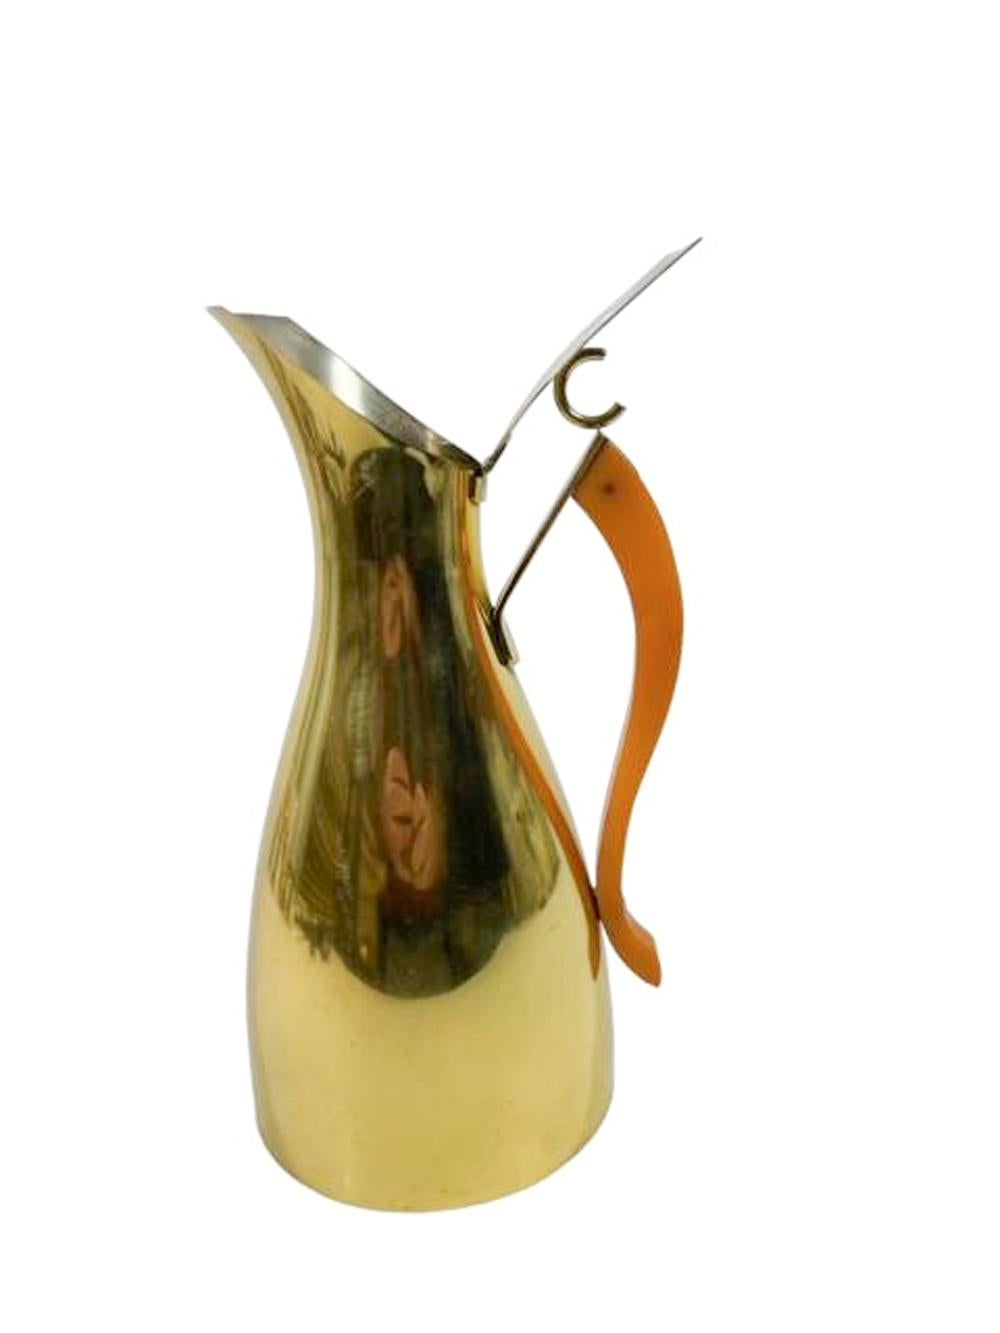 Italian modernist brass bar pitcher with hinged lid and tapering S-curved butterscotch Bakelite handle. Marked on bottom 